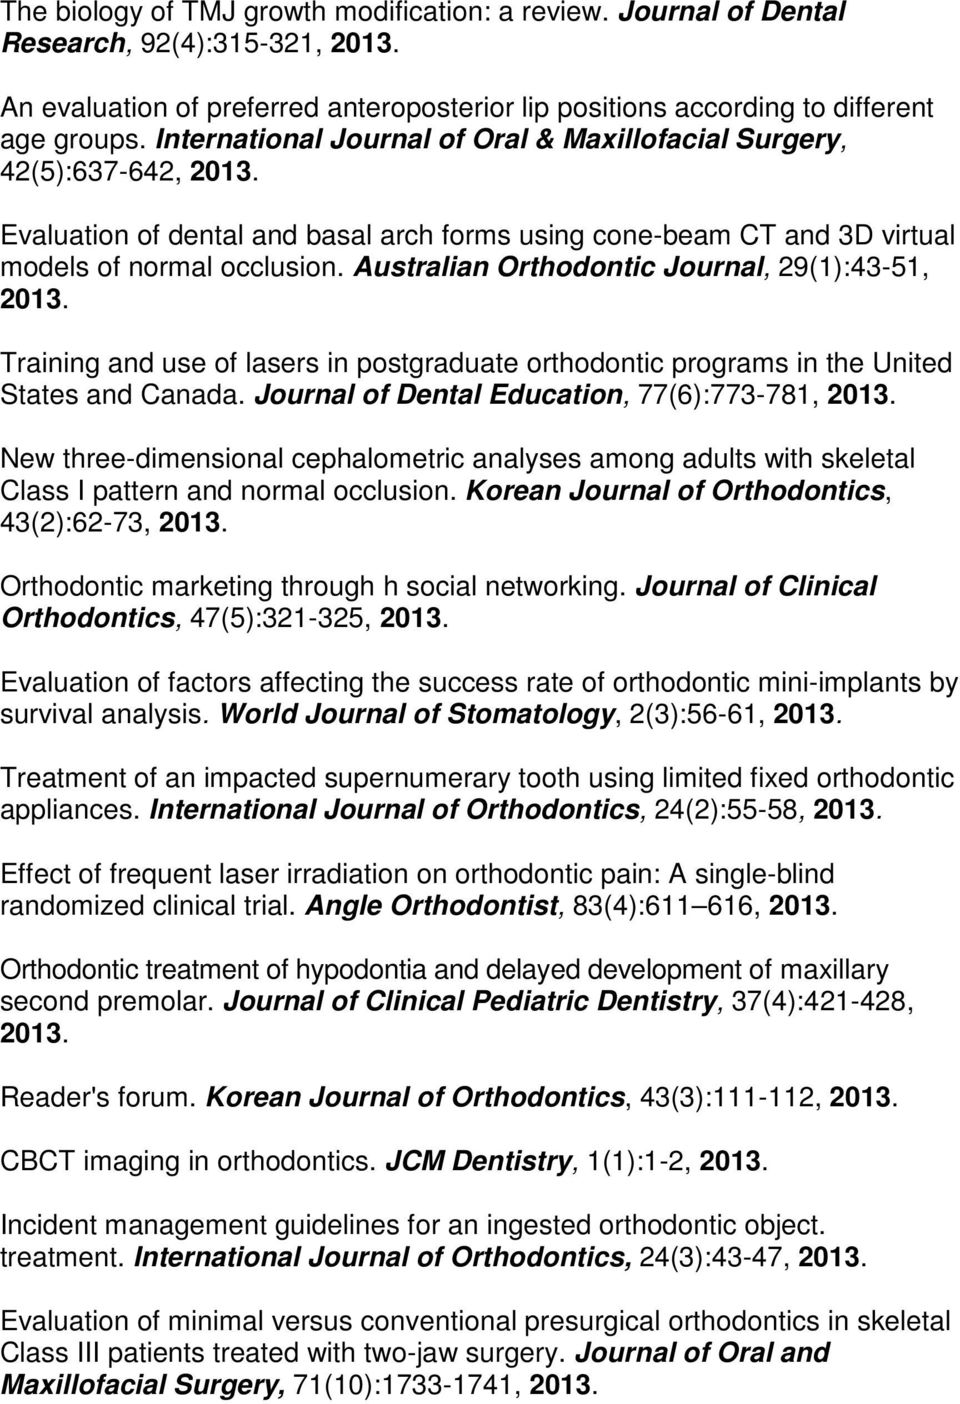 Australian Orthodontic Journal, 29(1):43-51, 2013. Training and use of lasers in postgraduate orthodontic programs in the United States and Canada. Journal of Dental Education, 77(6):773-781, 2013.